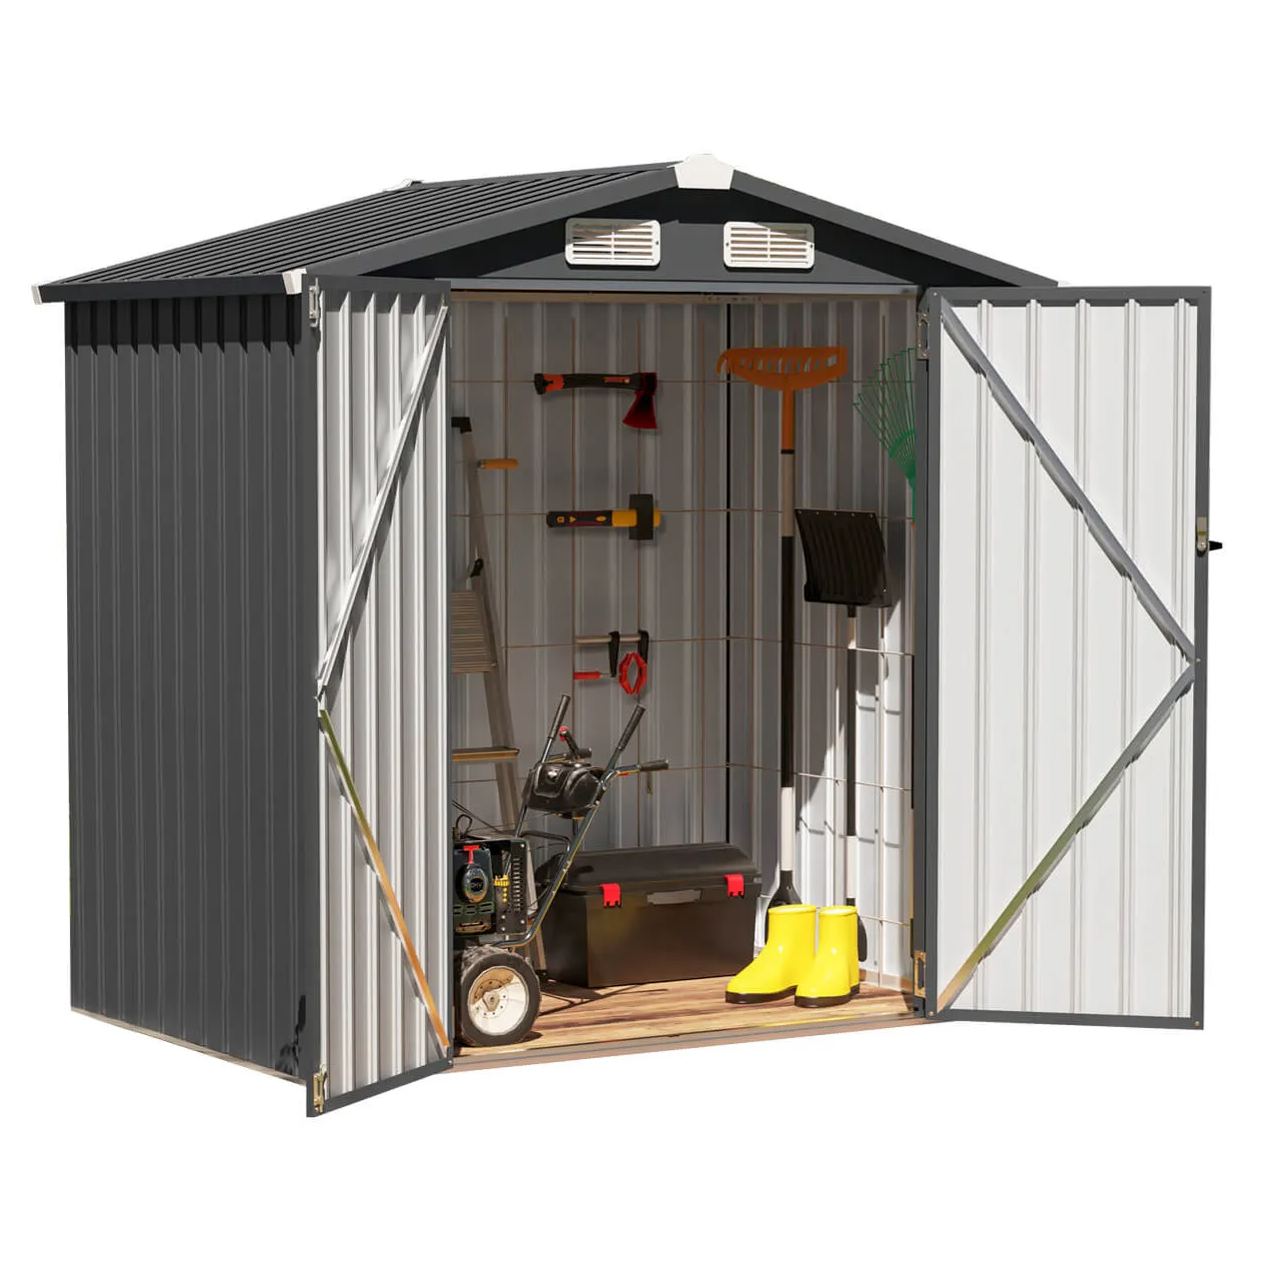 6'x 4' Outdoor Storage Shed Metal Garden Tool Shed for Backyard, Patio, Lawn, Black | Orange-Casual